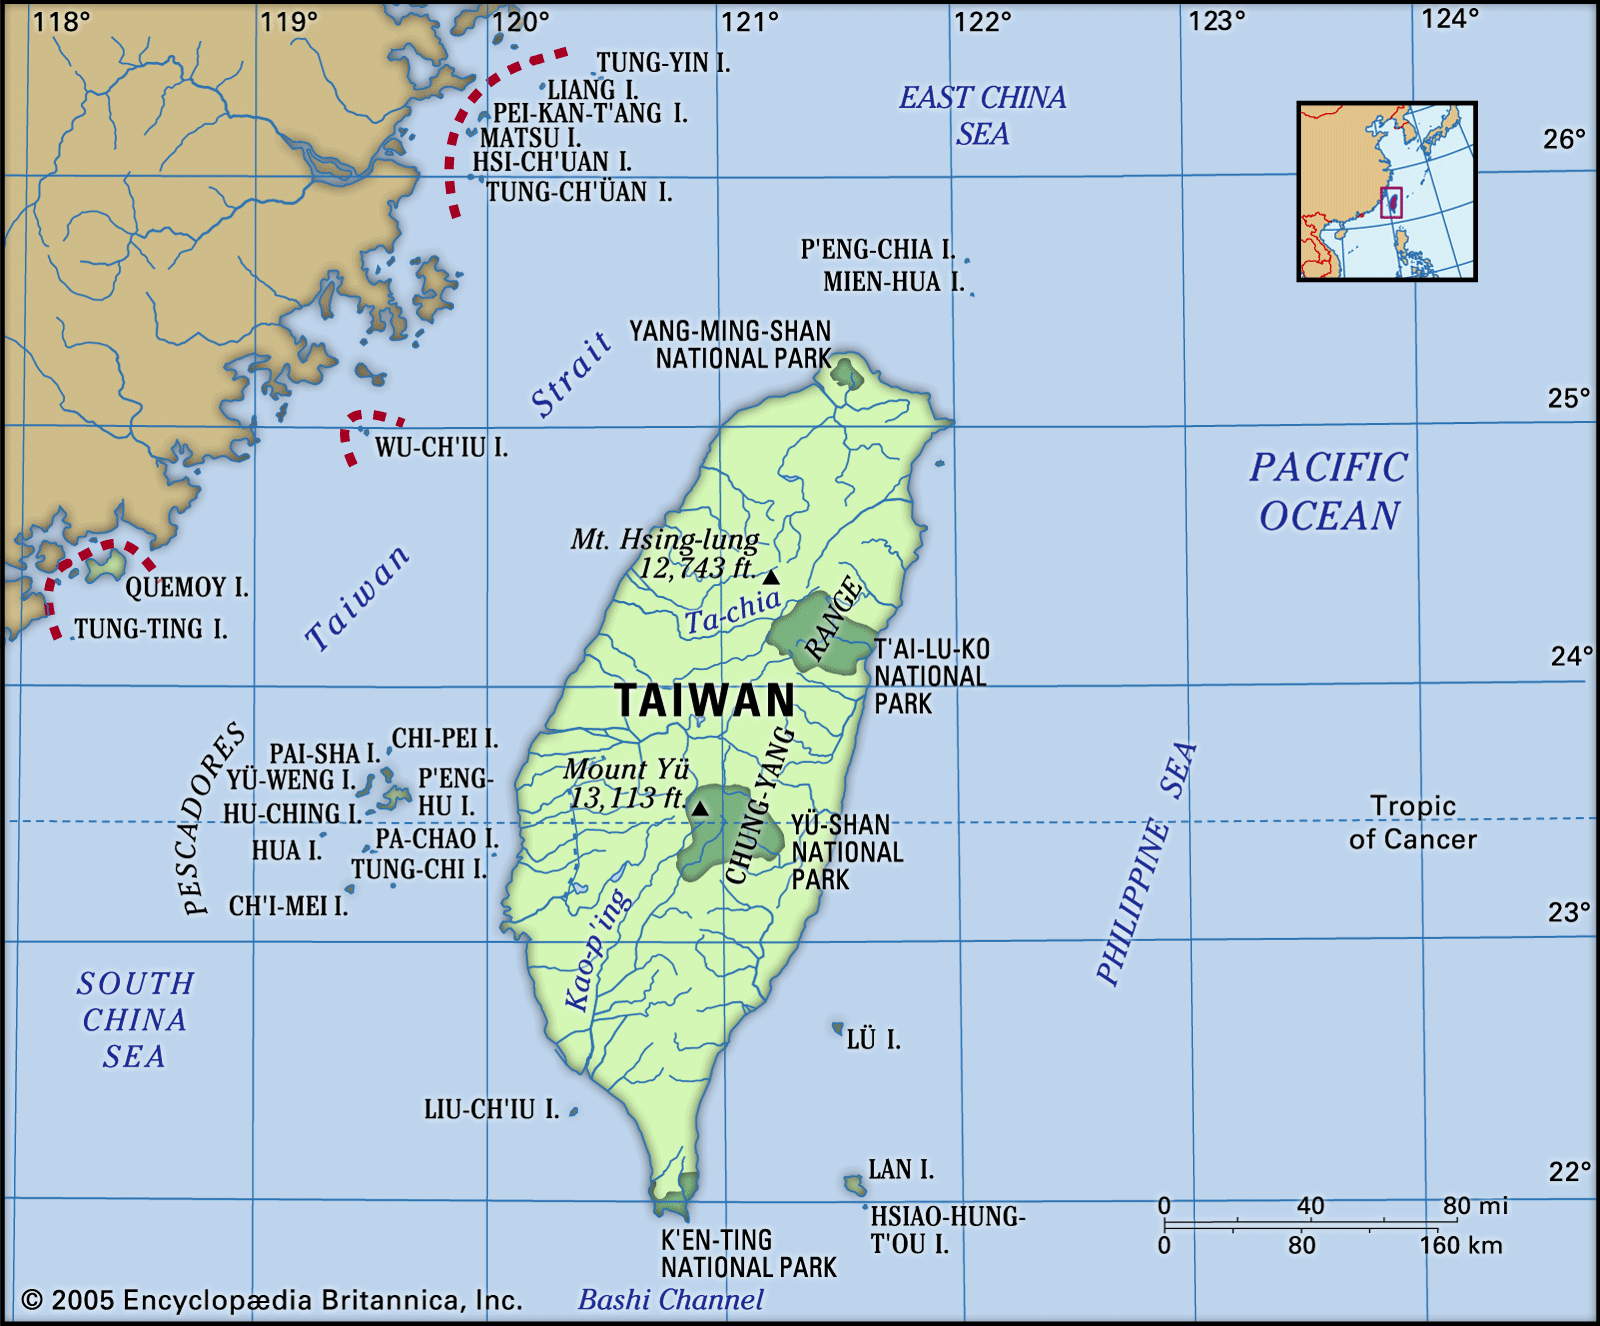 US allies prepare for possible war over Taiwan